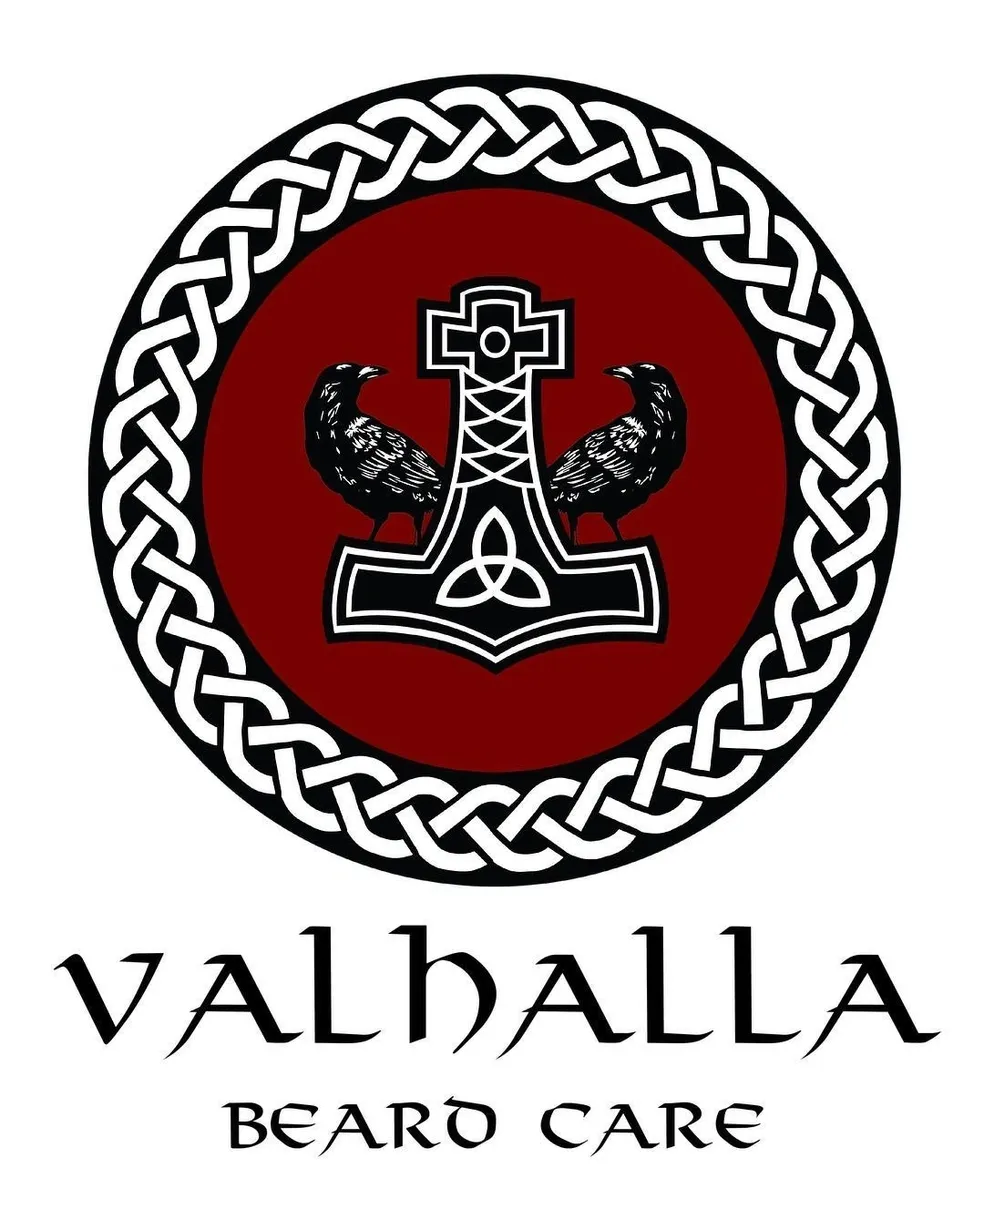 A red and white logo with the name of valhalla.